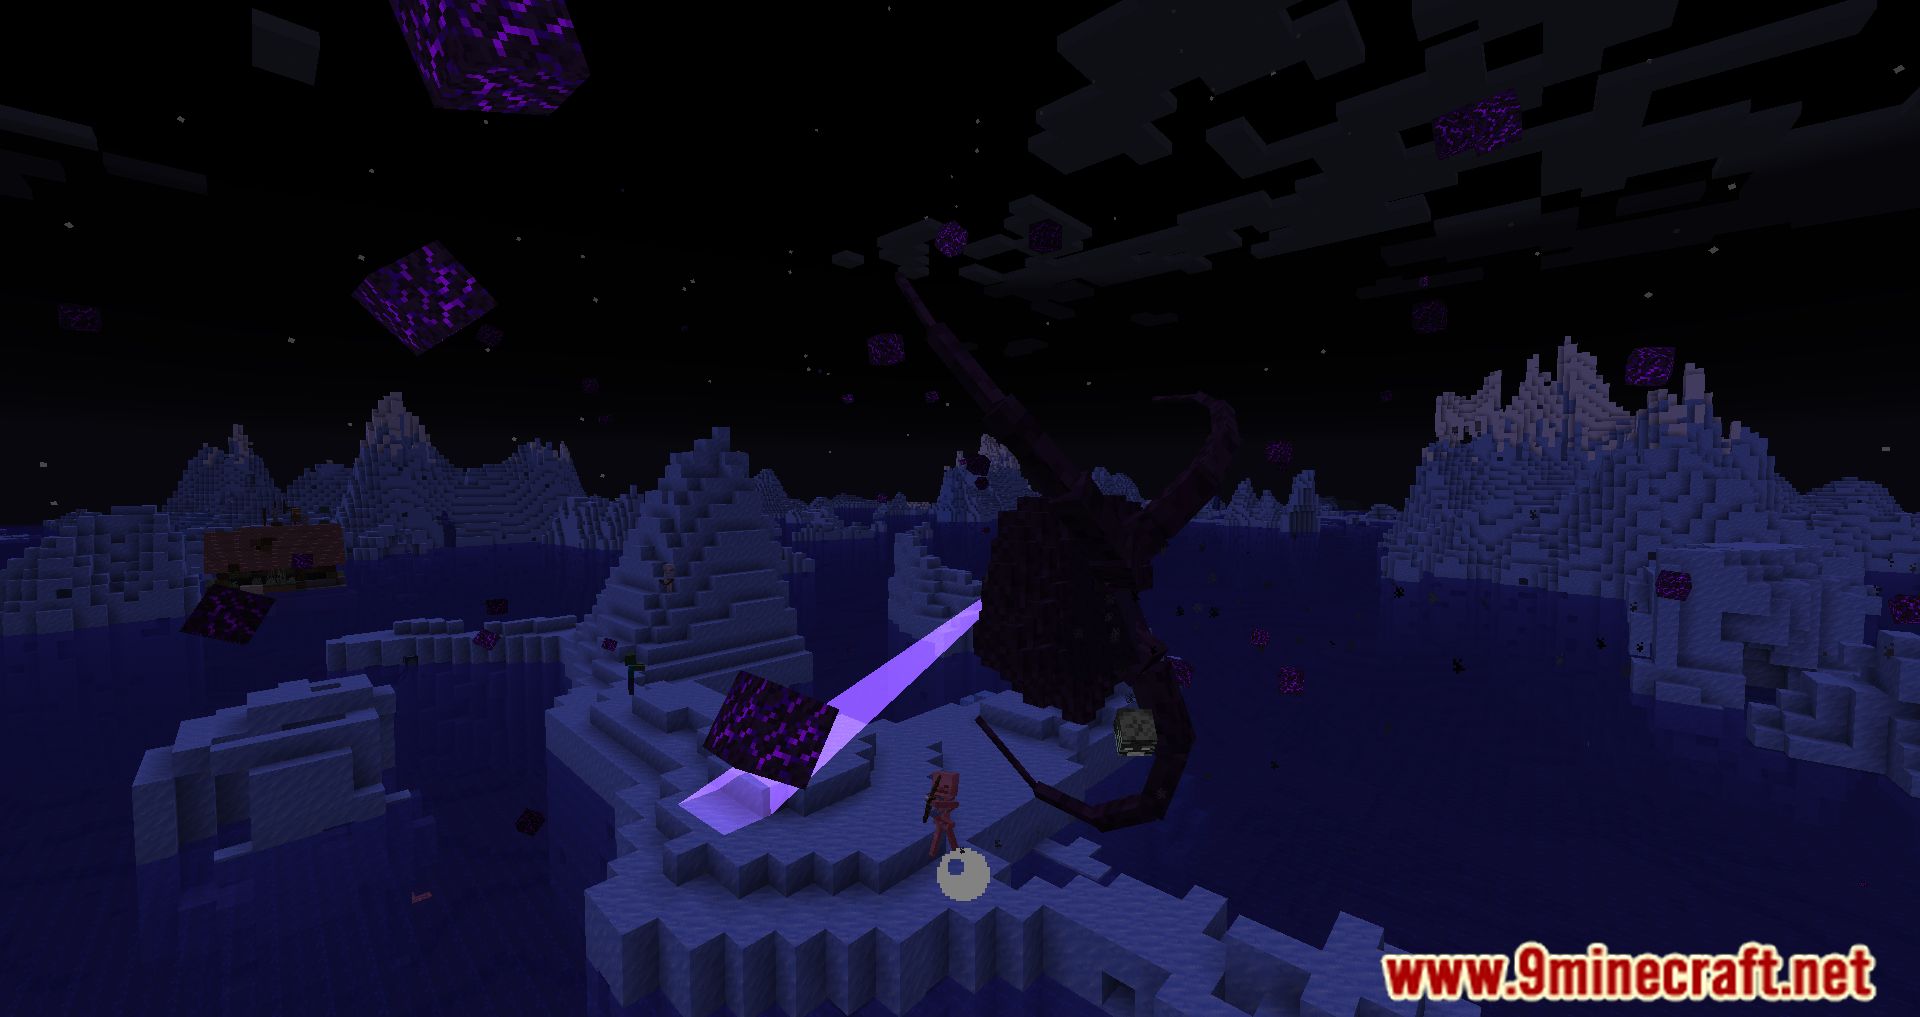 The Wither Storm by Dannn123 on Newgrounds